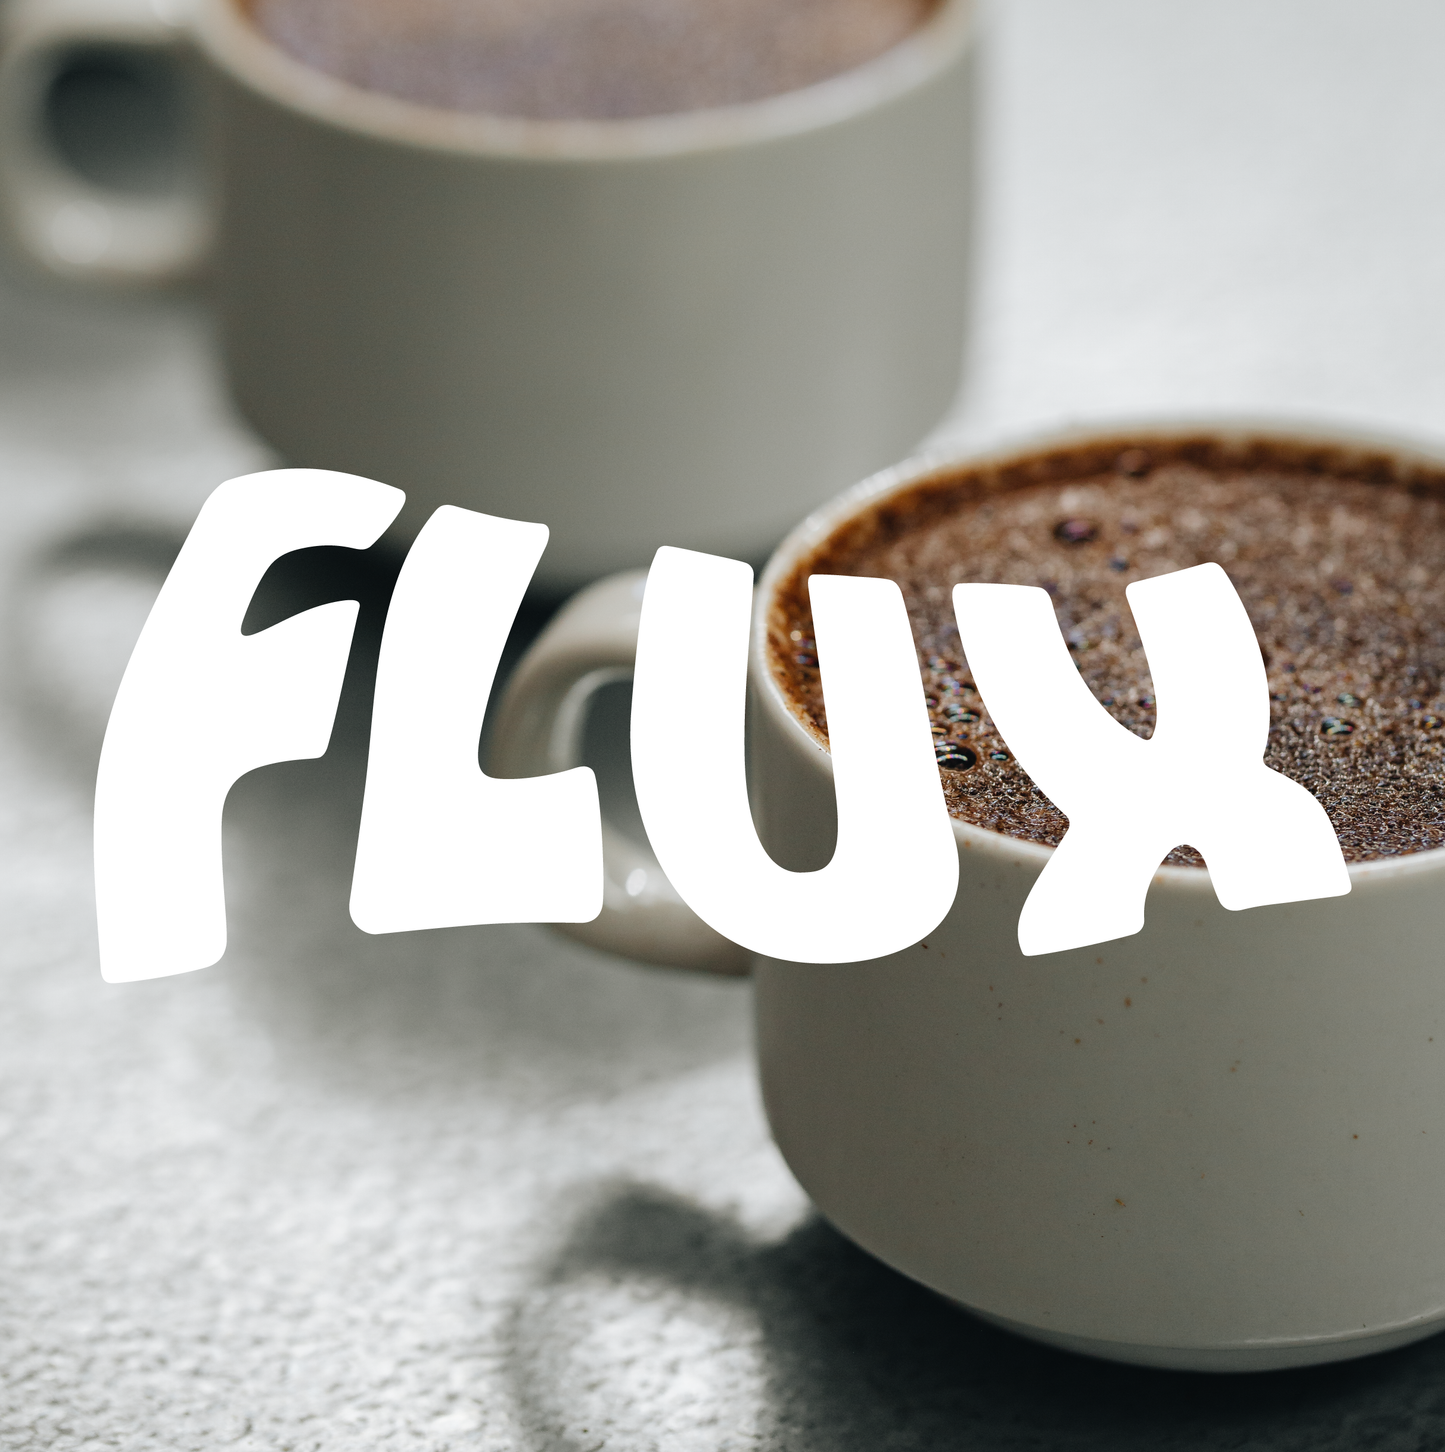 Flux Blend Subscription - 6 months - Weekly Delivery.